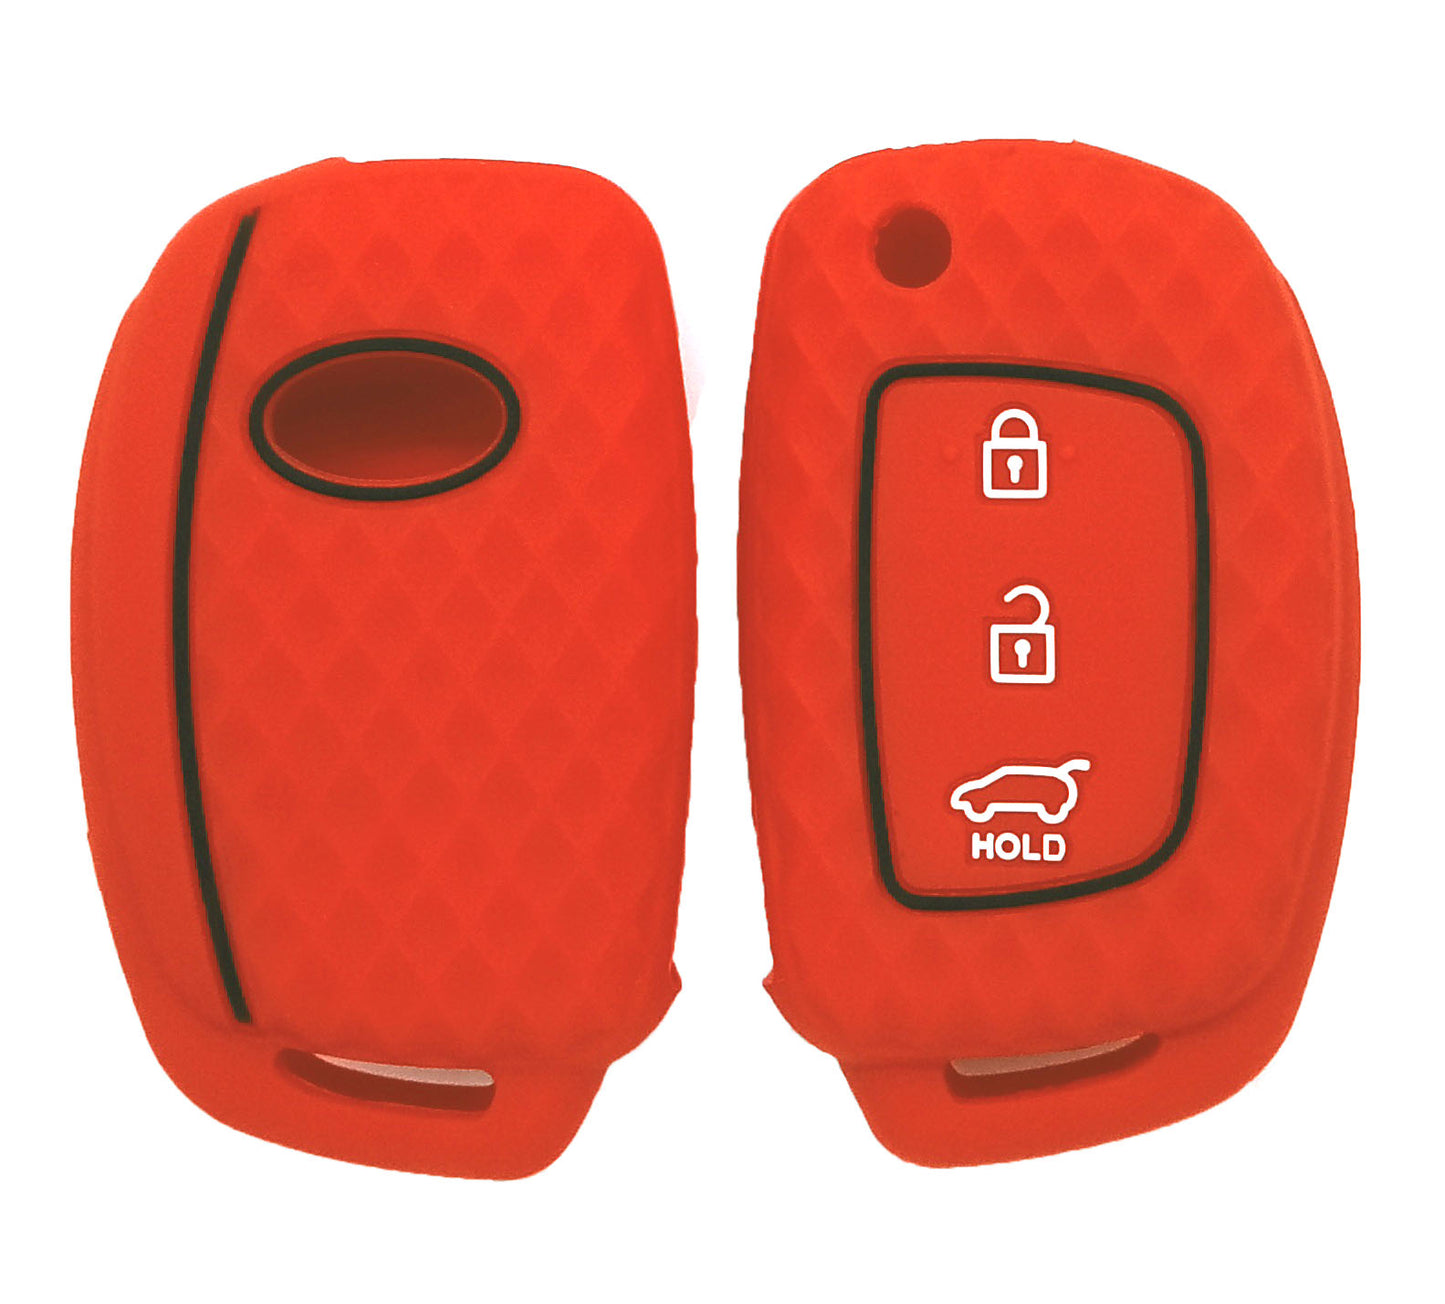 Silicone Key Cover Compatible for Hyundai i20 | Verna Fluidic | Xcent flip Key (2012-2014 Models only)